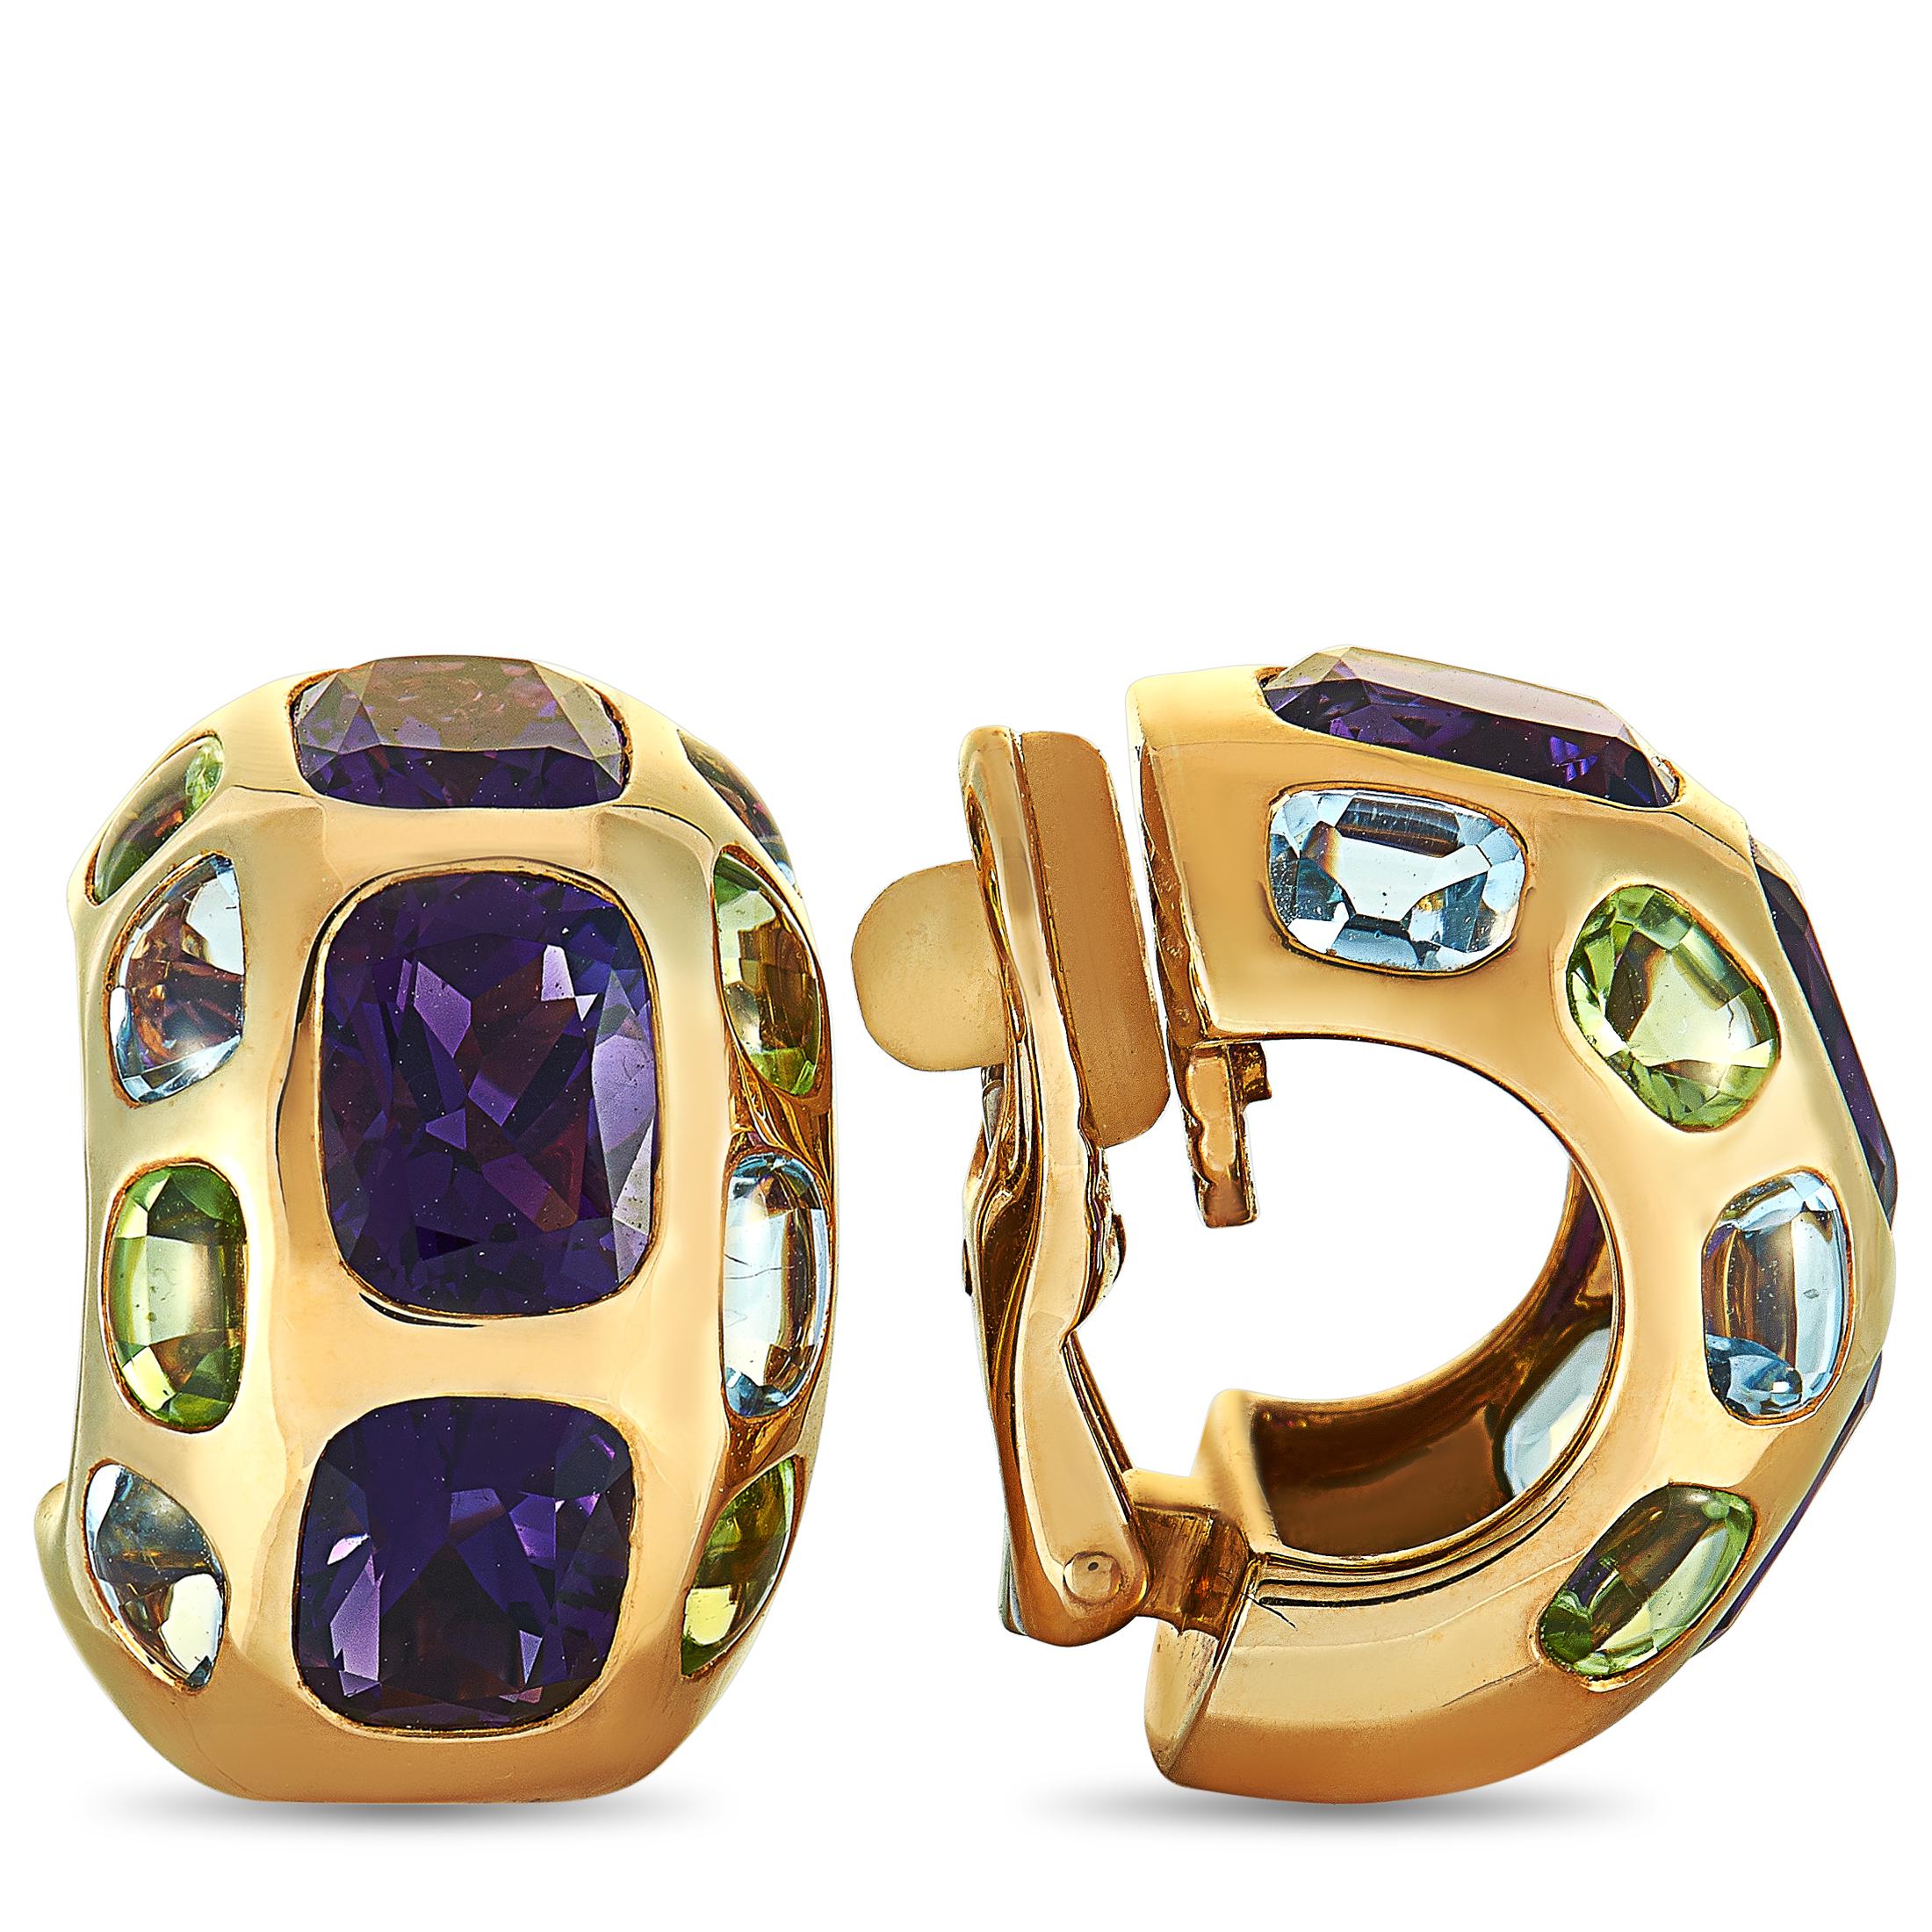 These Chanel earrings are crafted from 18K yellow gold and embellished with multiple gemstones. The earrings measure 0.75” in length and 0.50” in width, and each of the two weighs 11.5 grams.

Offered in estate condition, this pair of earrings